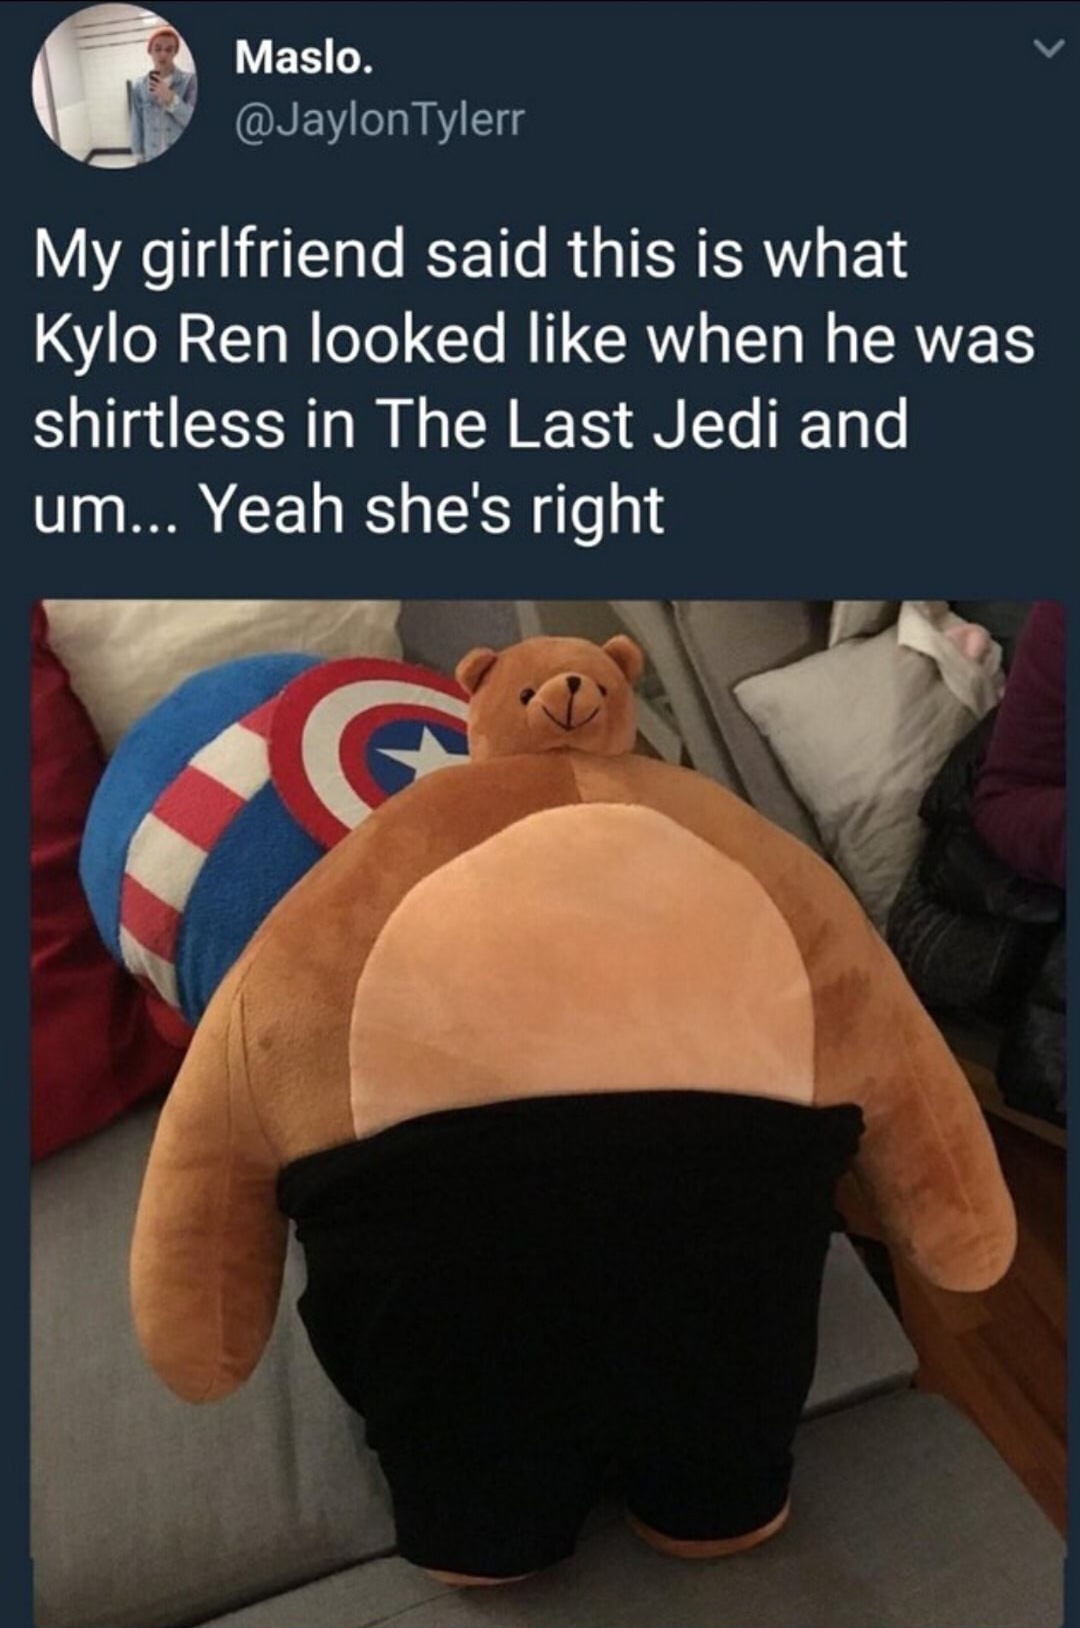 shirtless kylo ren meme - Maslo. ' Tylerr My girlfriend said this is what Kylo Ren looked when he was shirtless in The Last Jedi and um... Yeah she's right